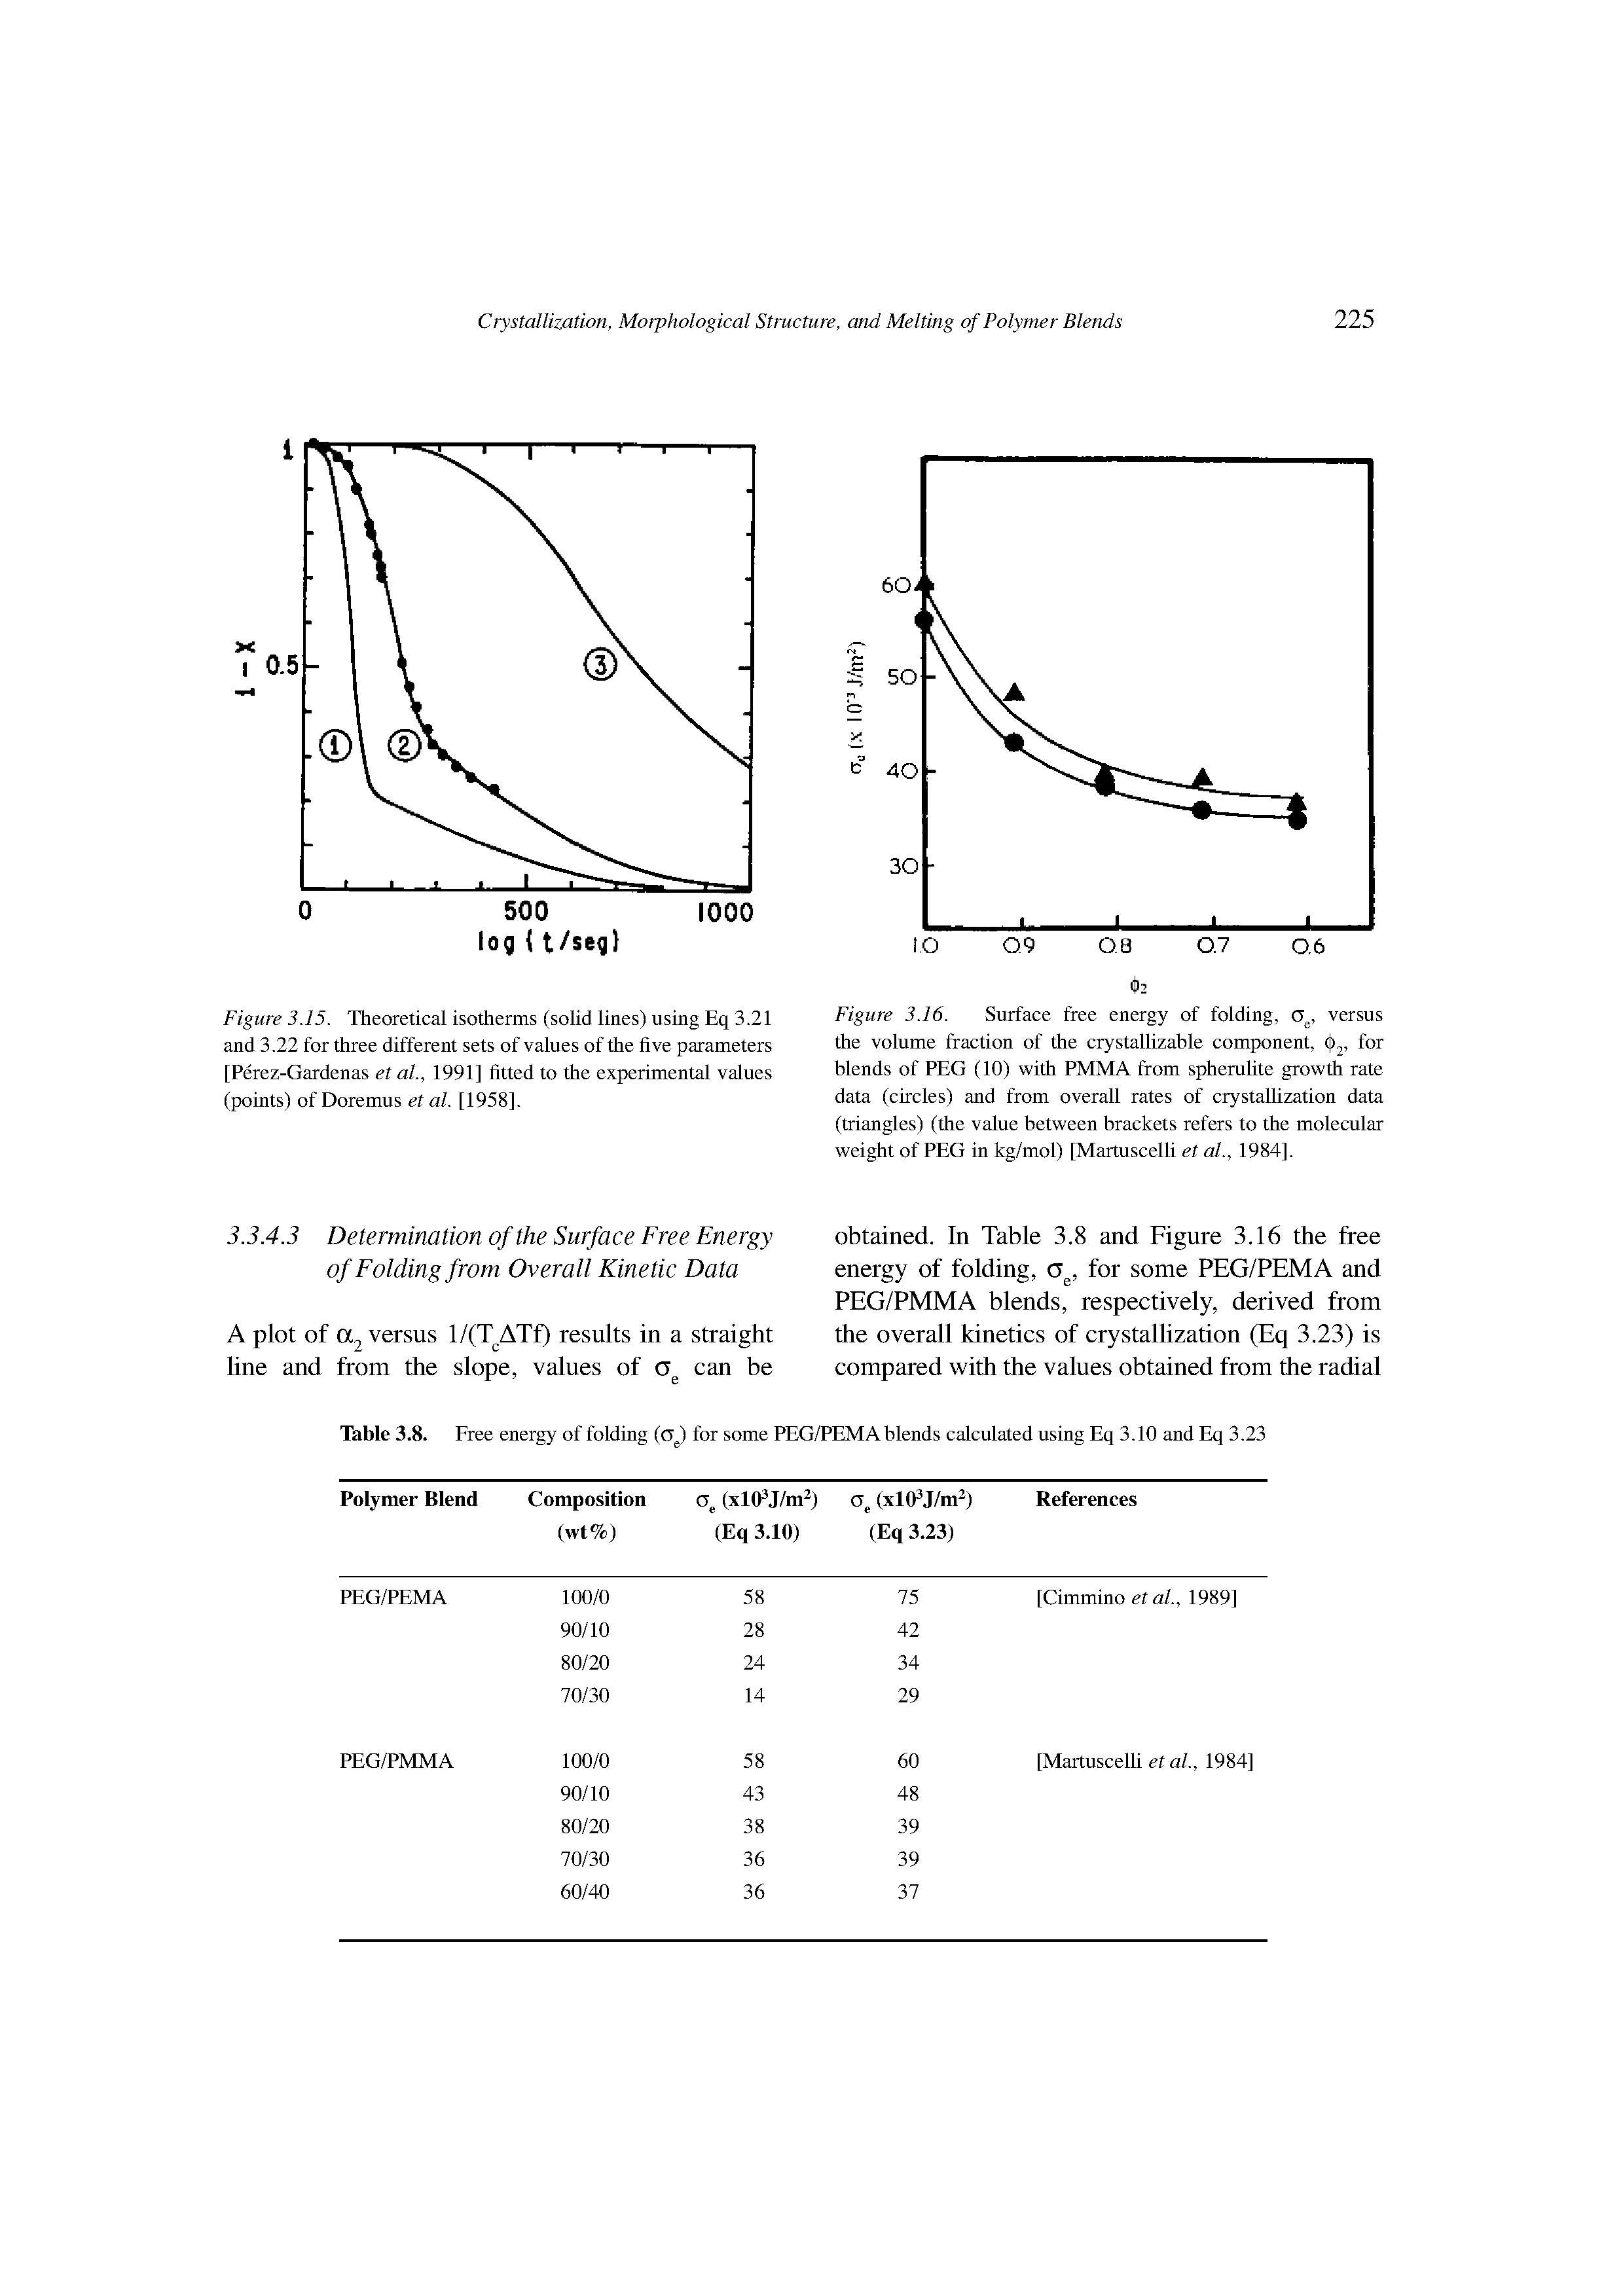 Figure 3.16. Surface free energy of folding, versus the volume fraction of the crystallizable component, for blends of PEG (10) with PMMA from spherulite growth rate data (circles) and from overall rates of crystallization data (triangles) (the value between brackets refers to the molecular weight of PEG in kg/mol) [Martuscelli et al., 1984].